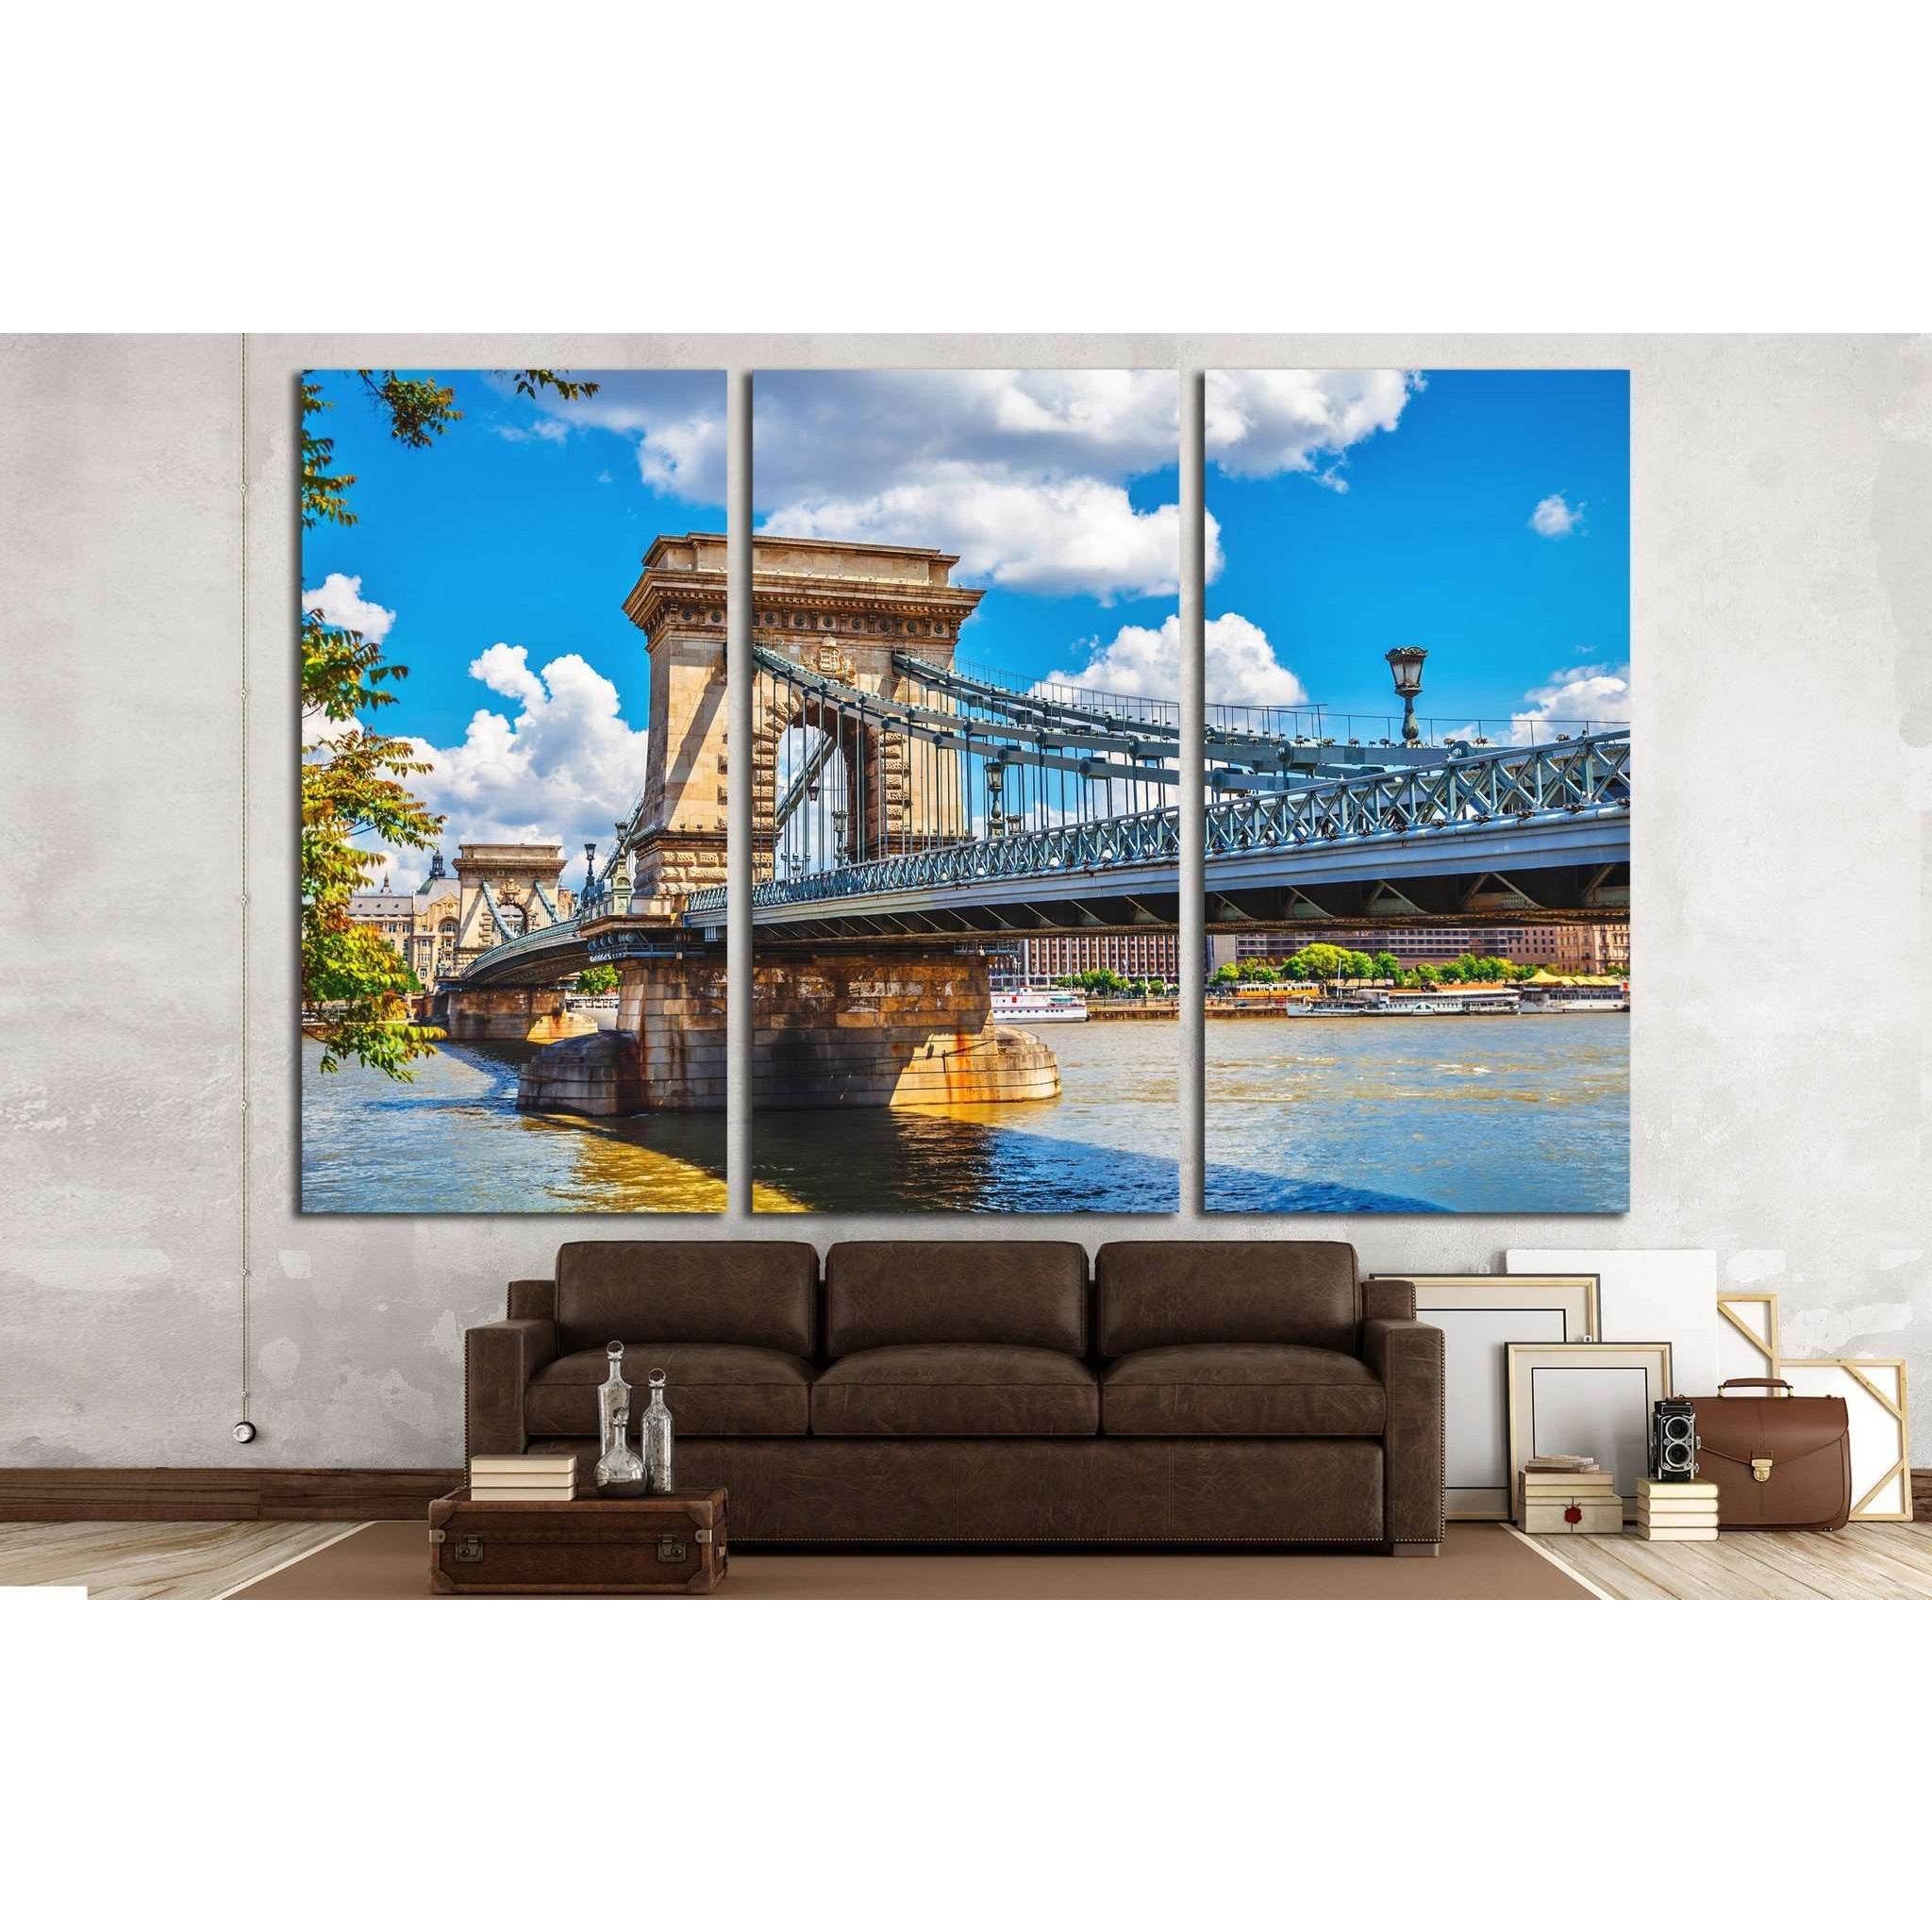 Chain bridge on danube river in budapest, hungary №1230 Ready to Hang Canvas Print